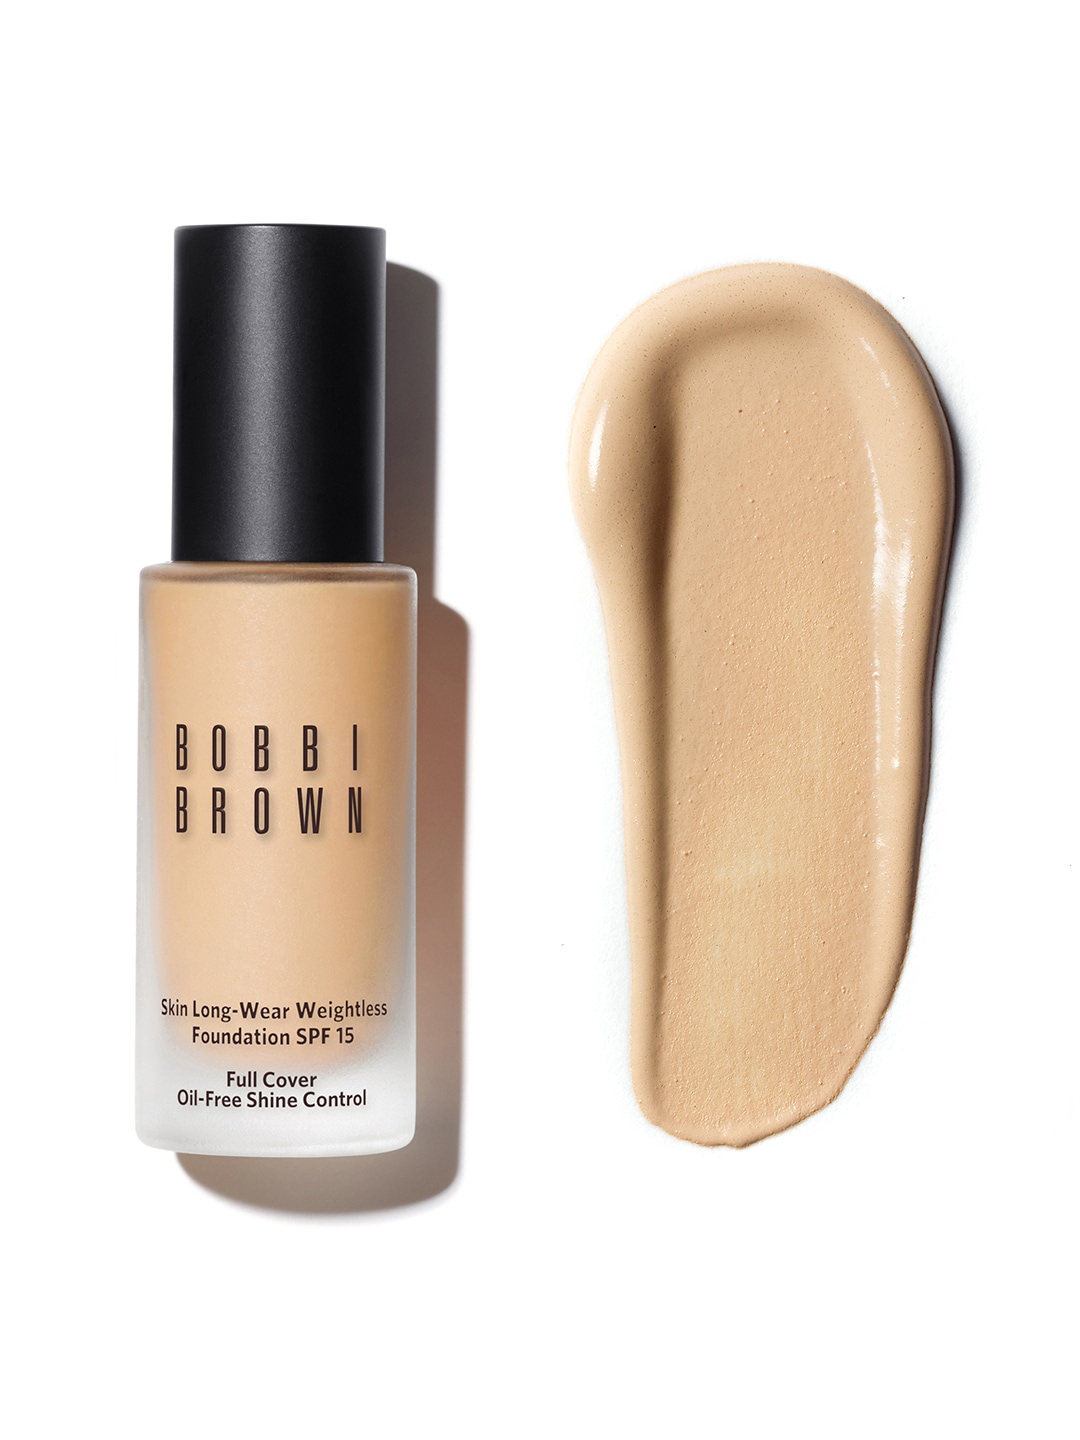 Bobbi Brown Skin Long-Wear Weightless Foundation with SPF 15 - Ivory (C-024/0.75) 30ml Price in India